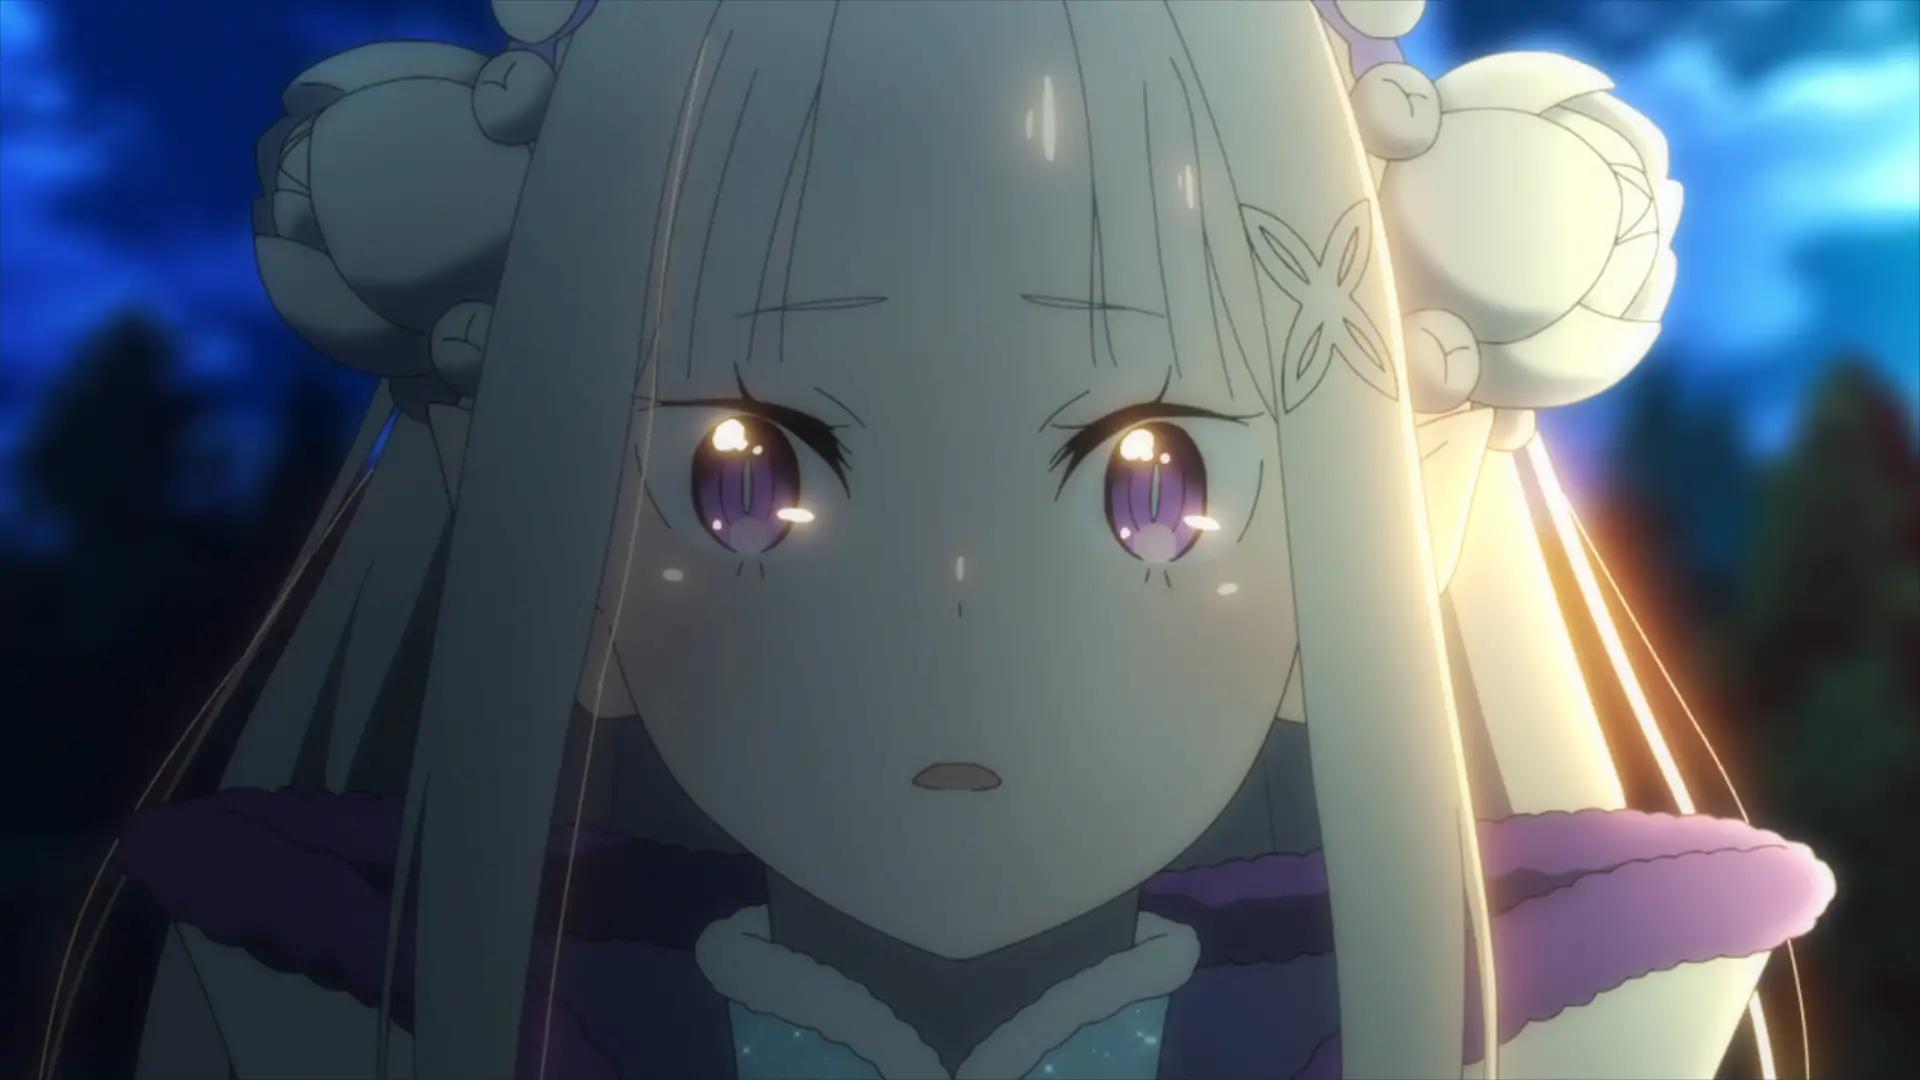 Get ready for the ultimate adventure: Re:Zero Season 3 coming soon